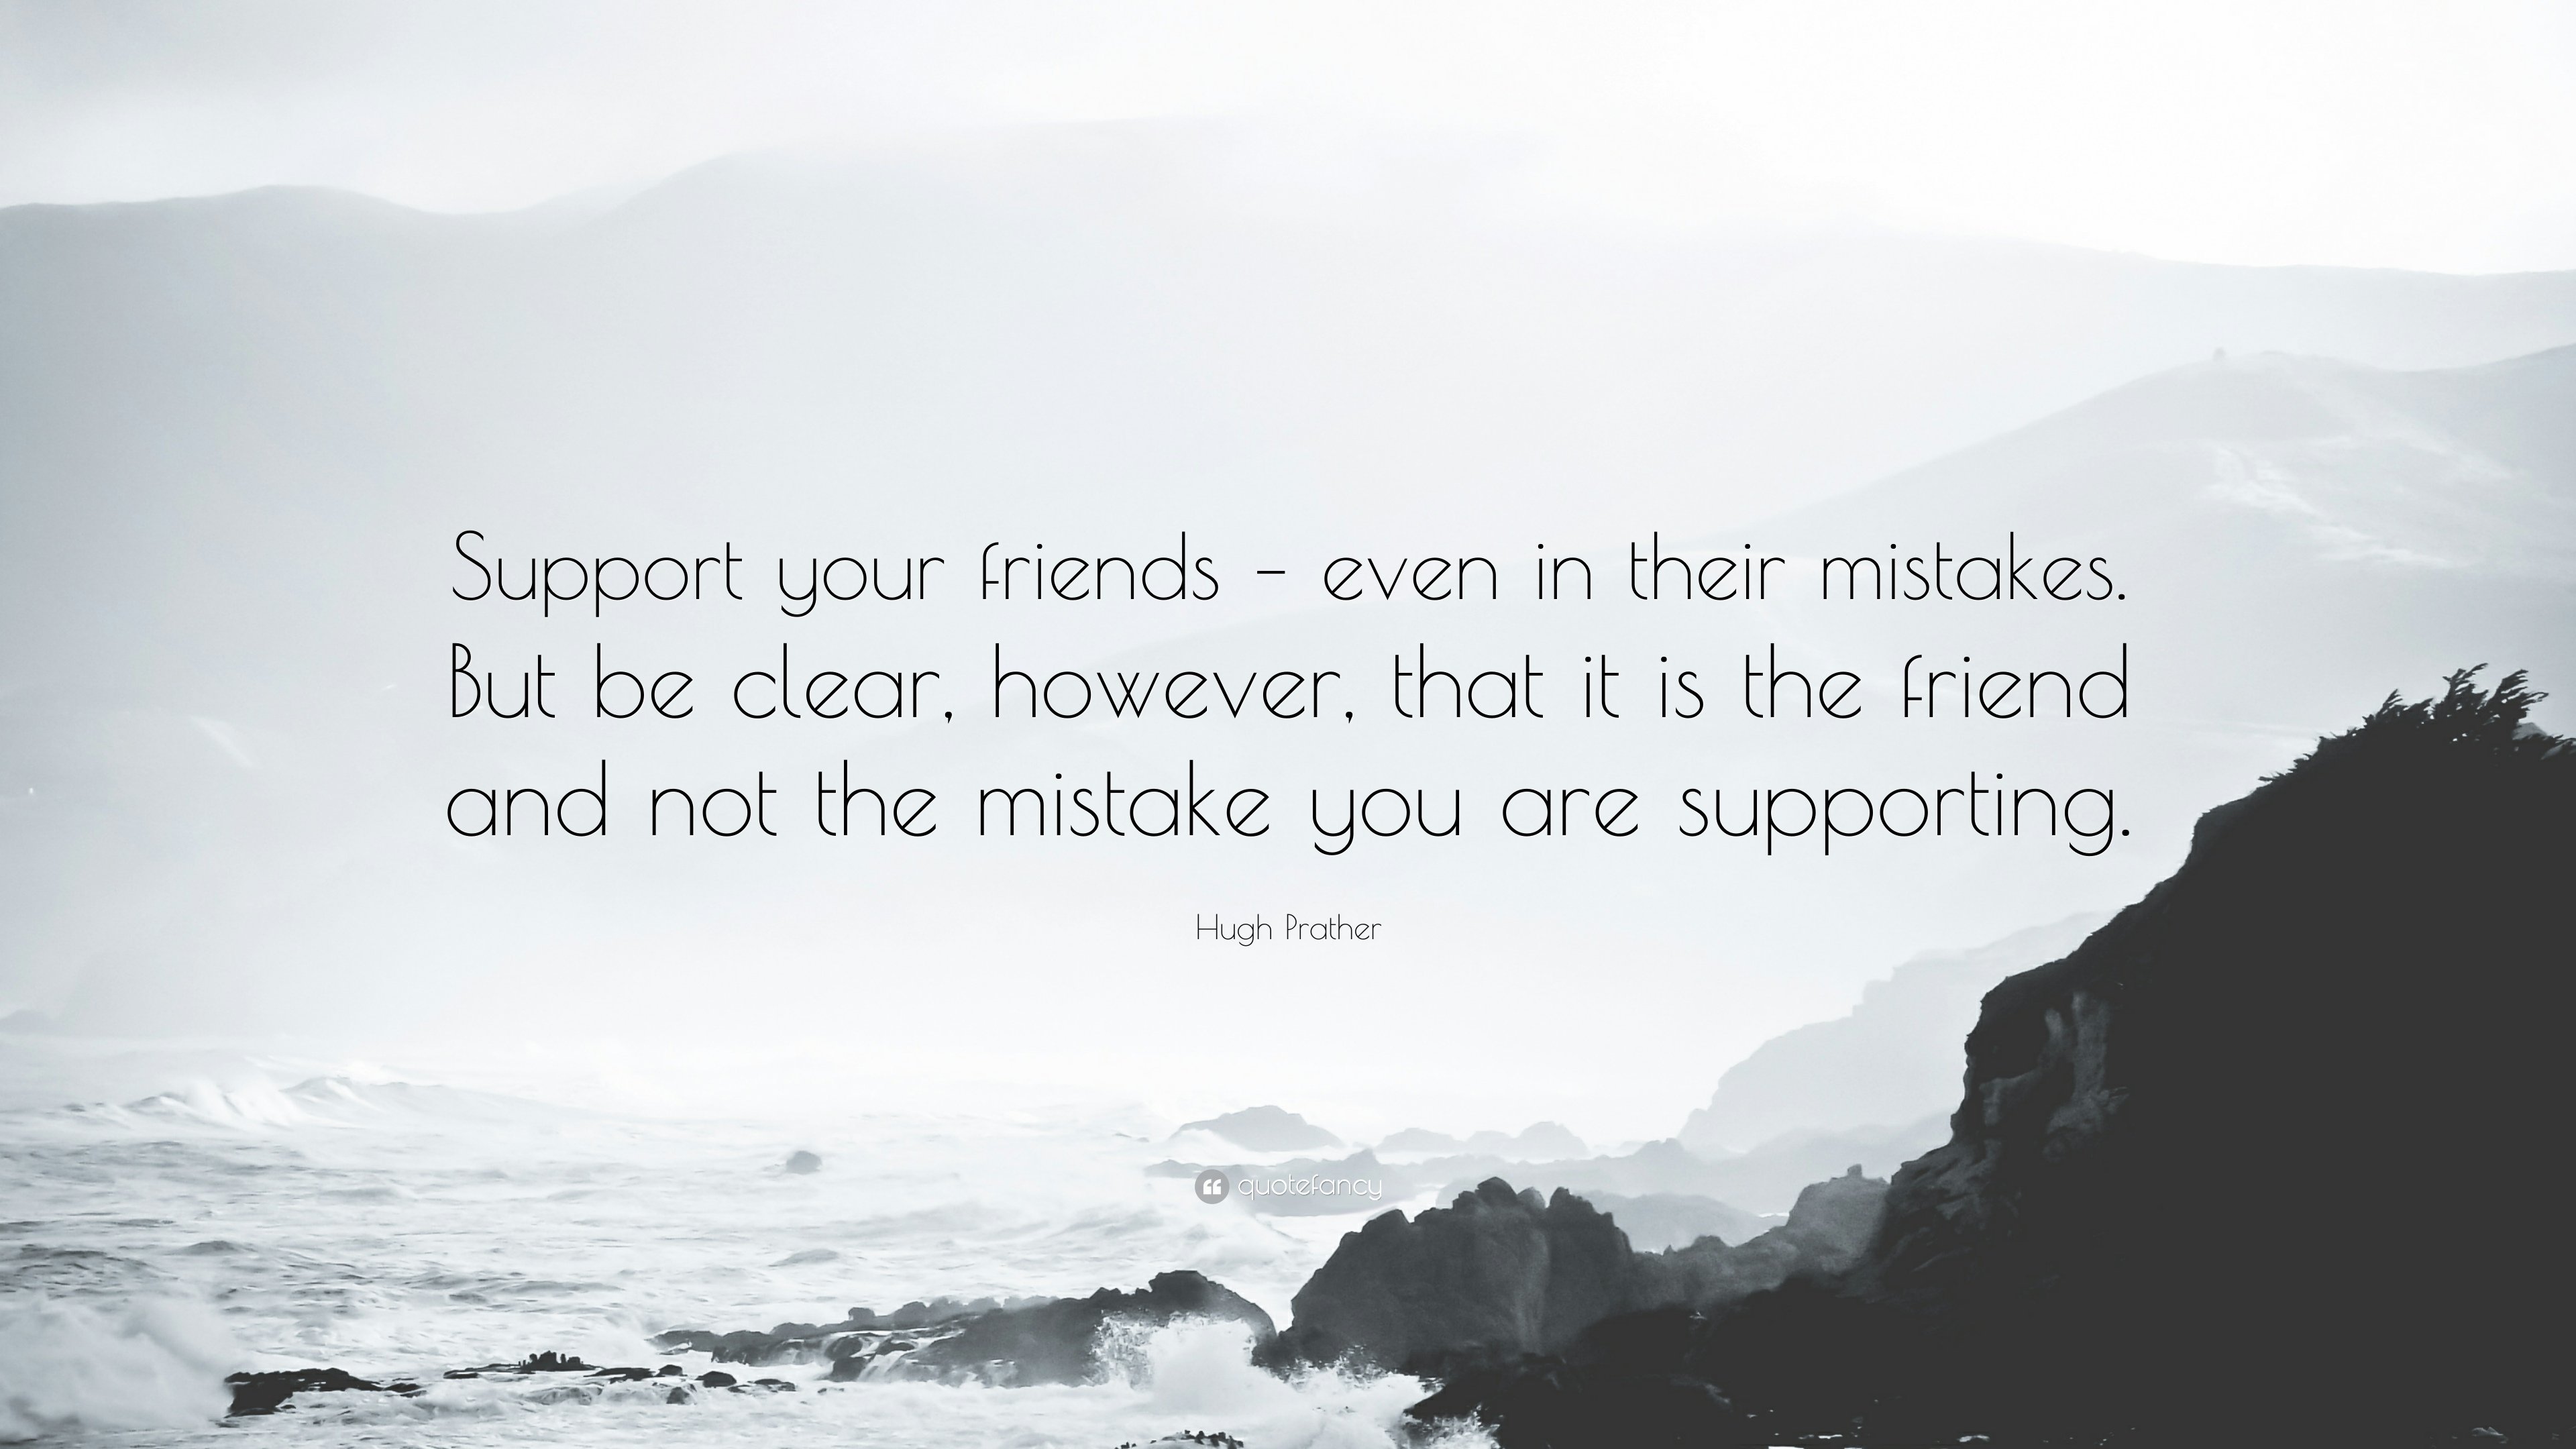 Hugh Prather Quote: “Support your friends